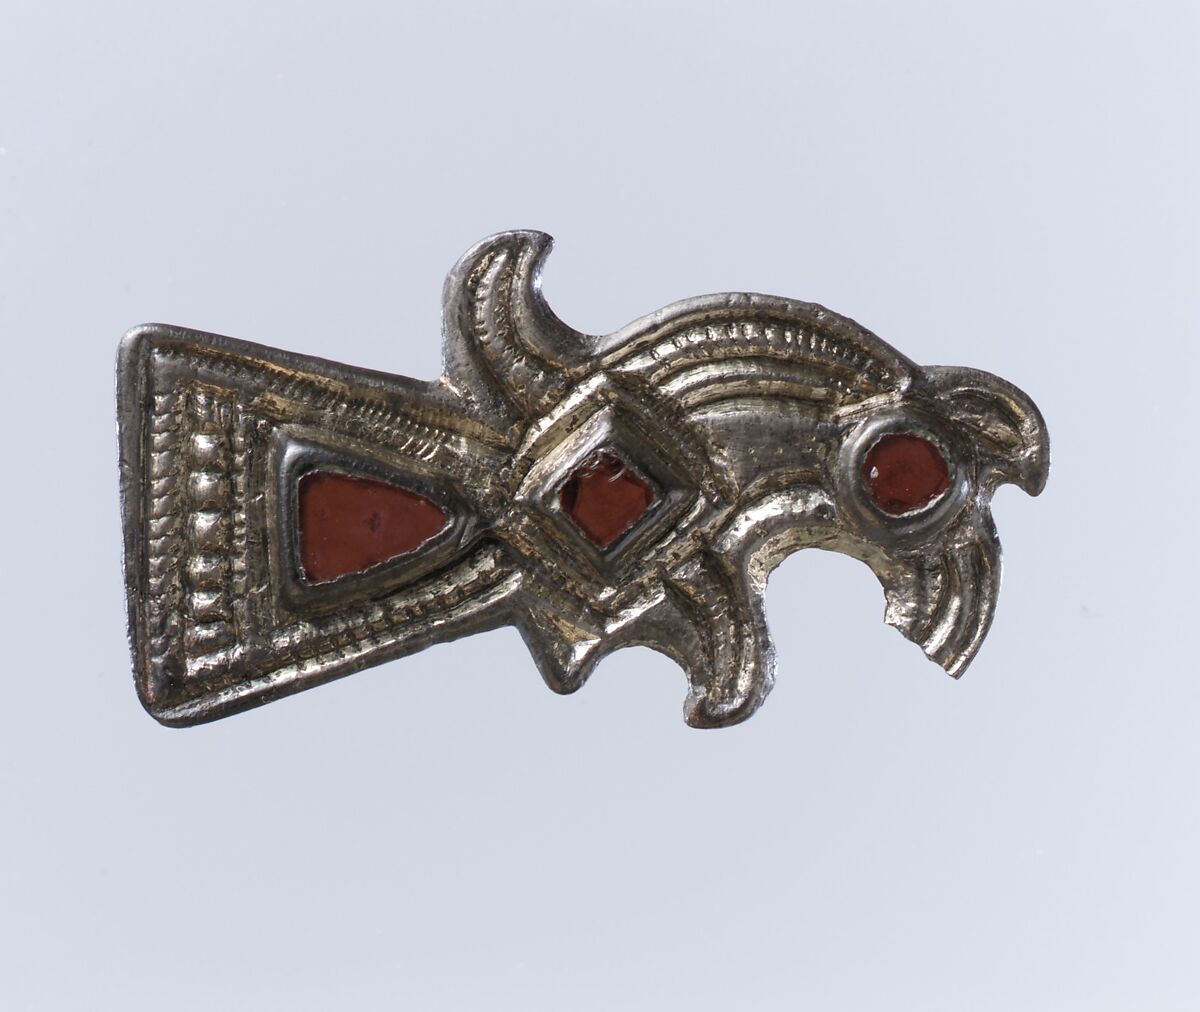 Bird-Shaped Brooch, Silver-gilt, garnets with patterned foil backings; iron spring/pin, Frankish 